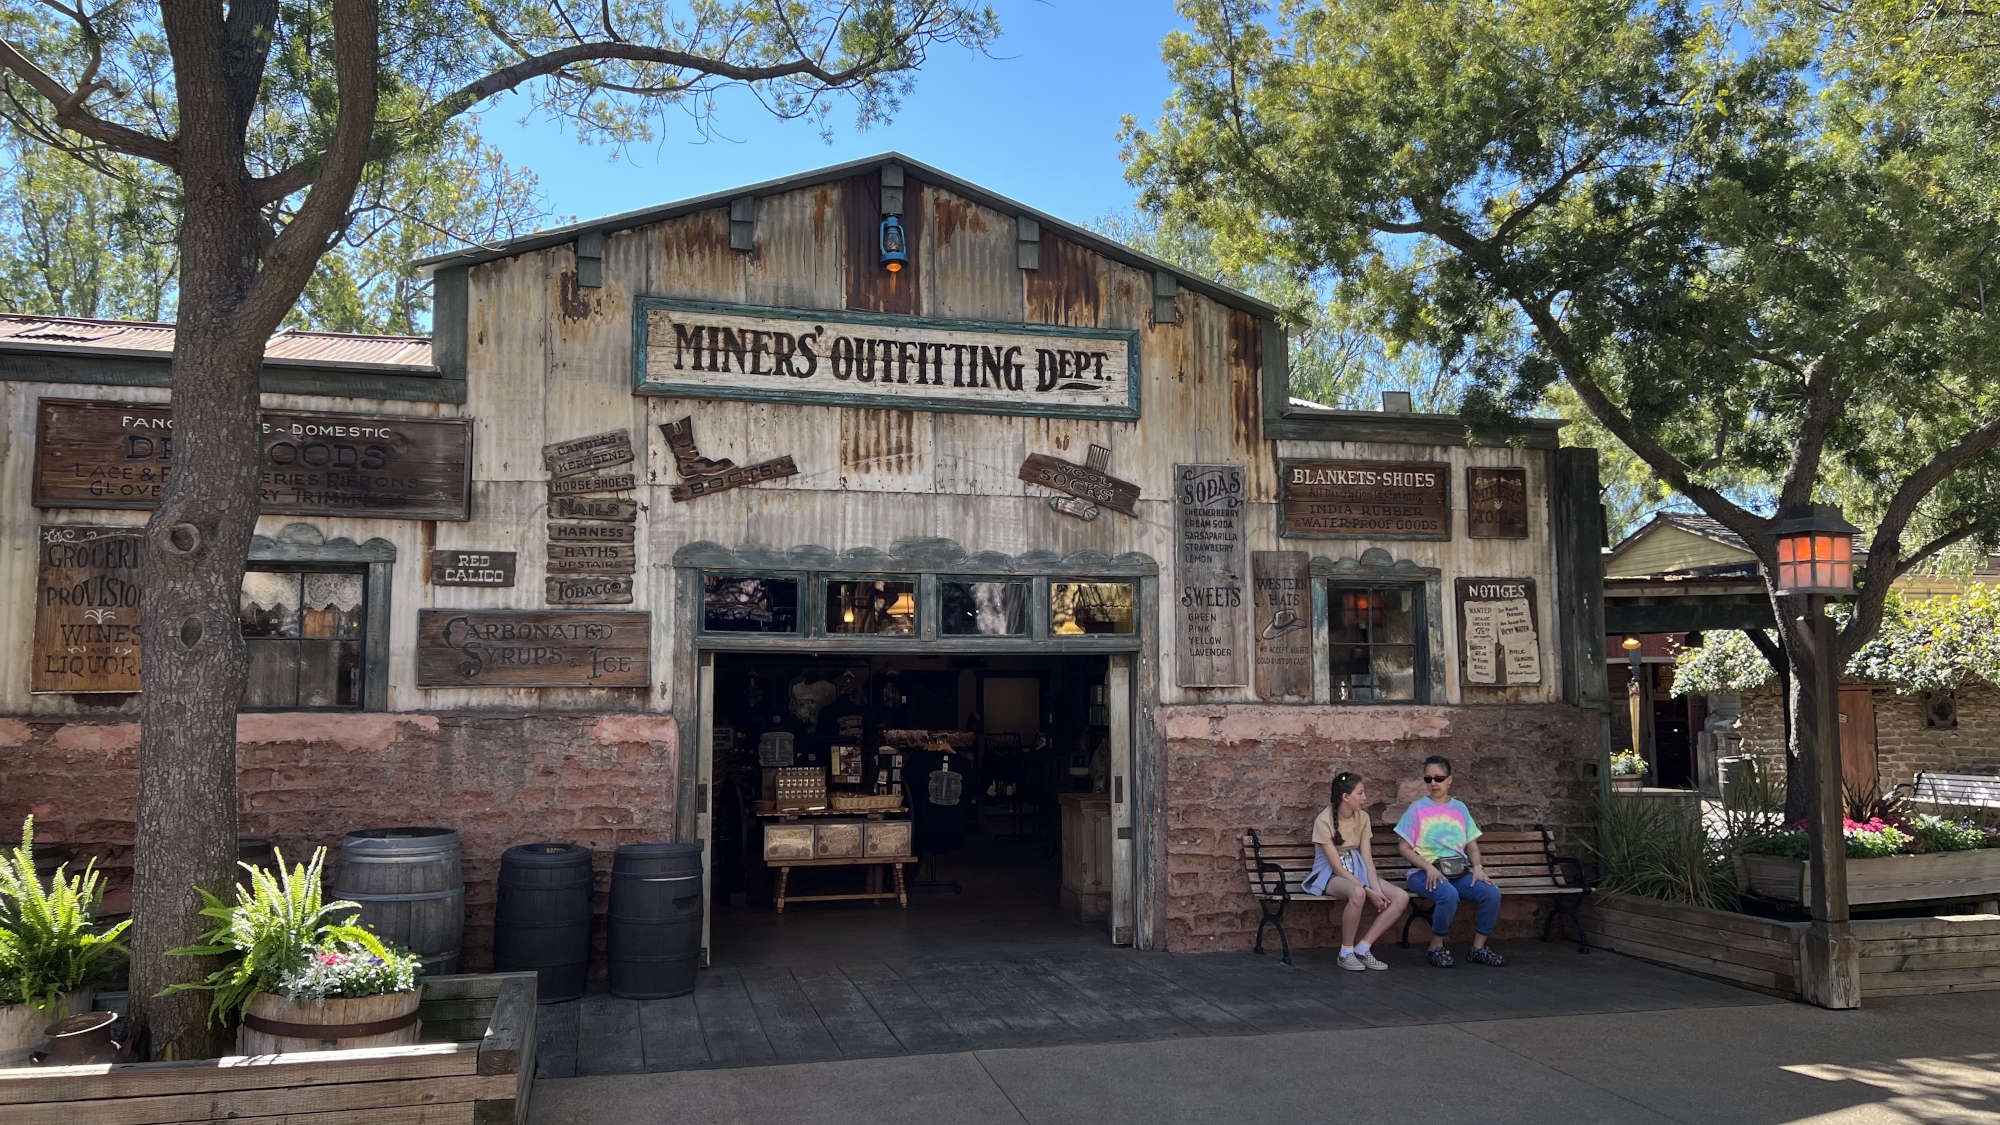 Knott's Berry Farm Miners' Outfitting Dept.